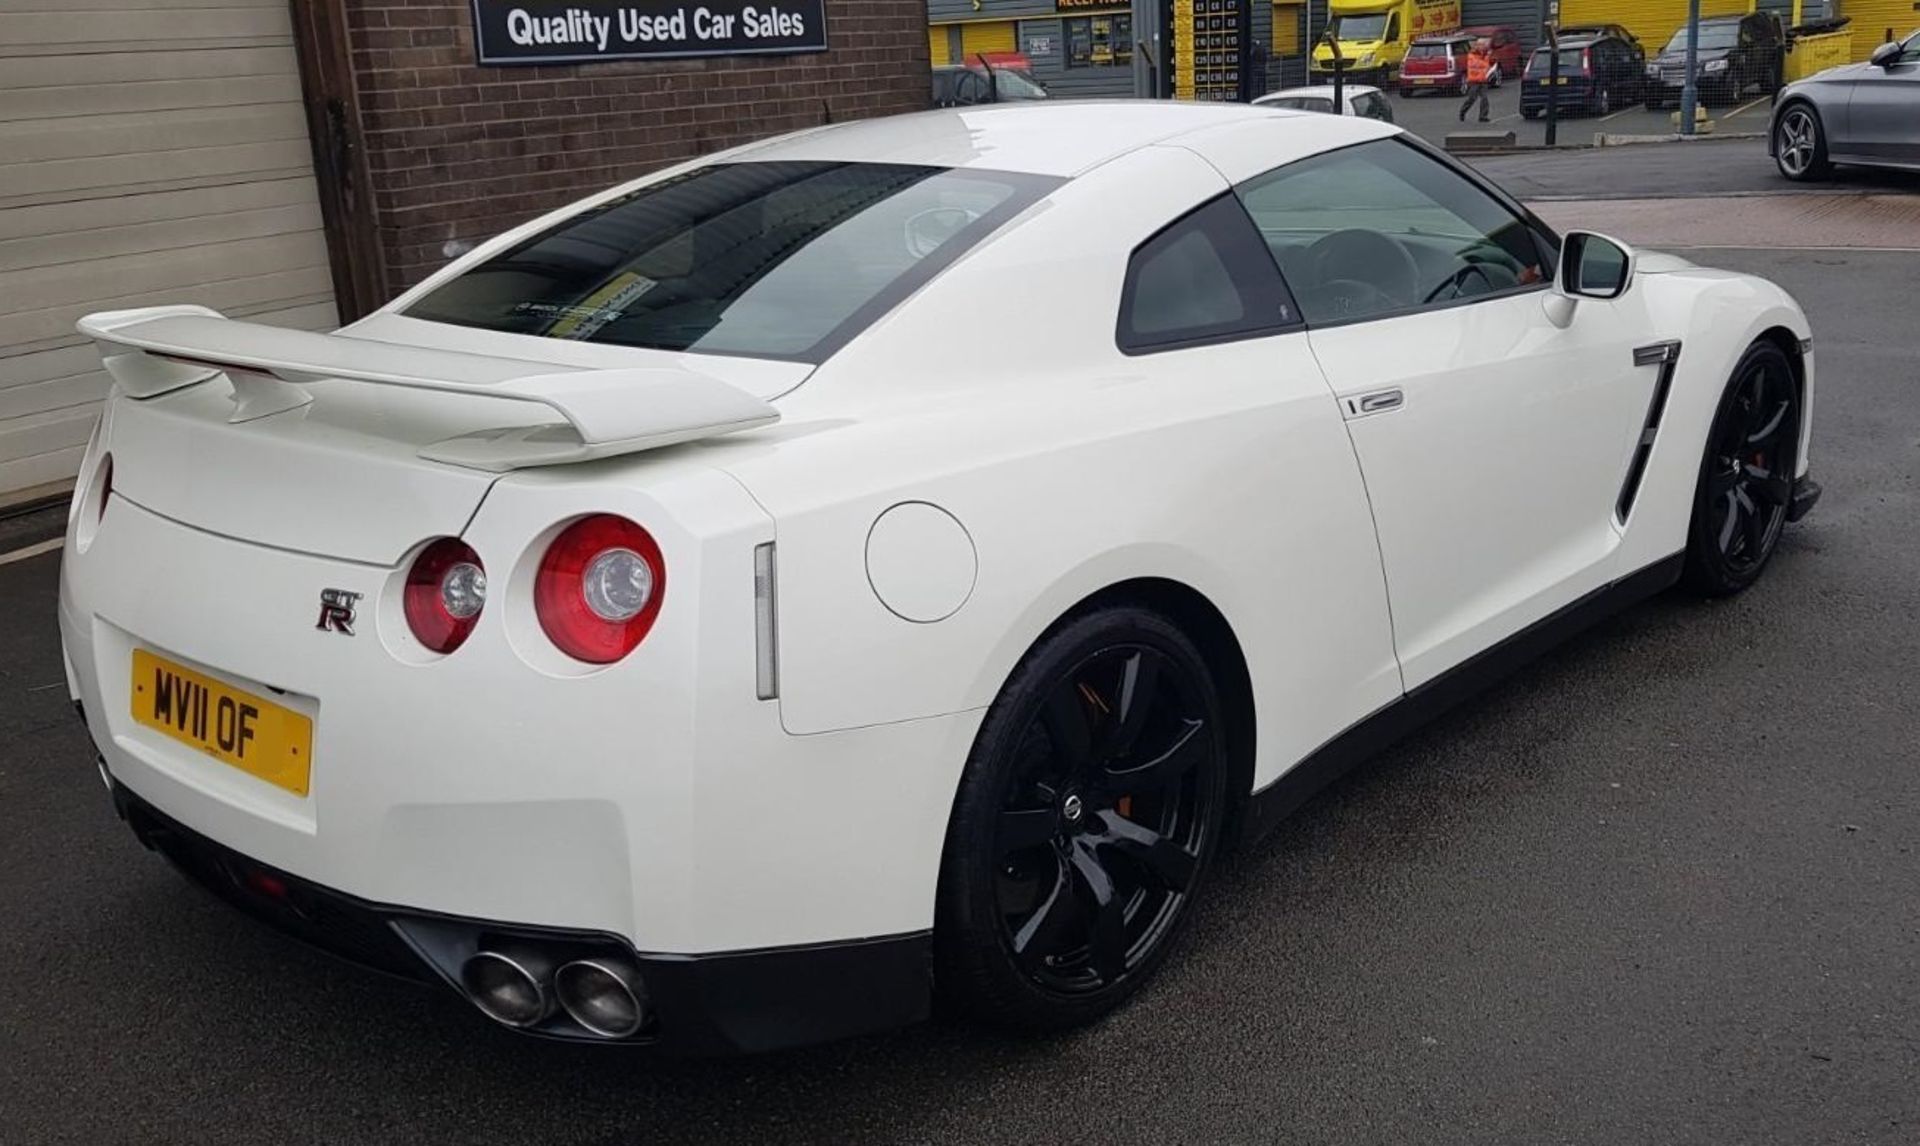 2011 NISSAN GT-R R35 750 stage 5 PREMIUM EDITION S-A 1 OWNER FROM NEW 20K MILES WARRANTED! - Image 6 of 7